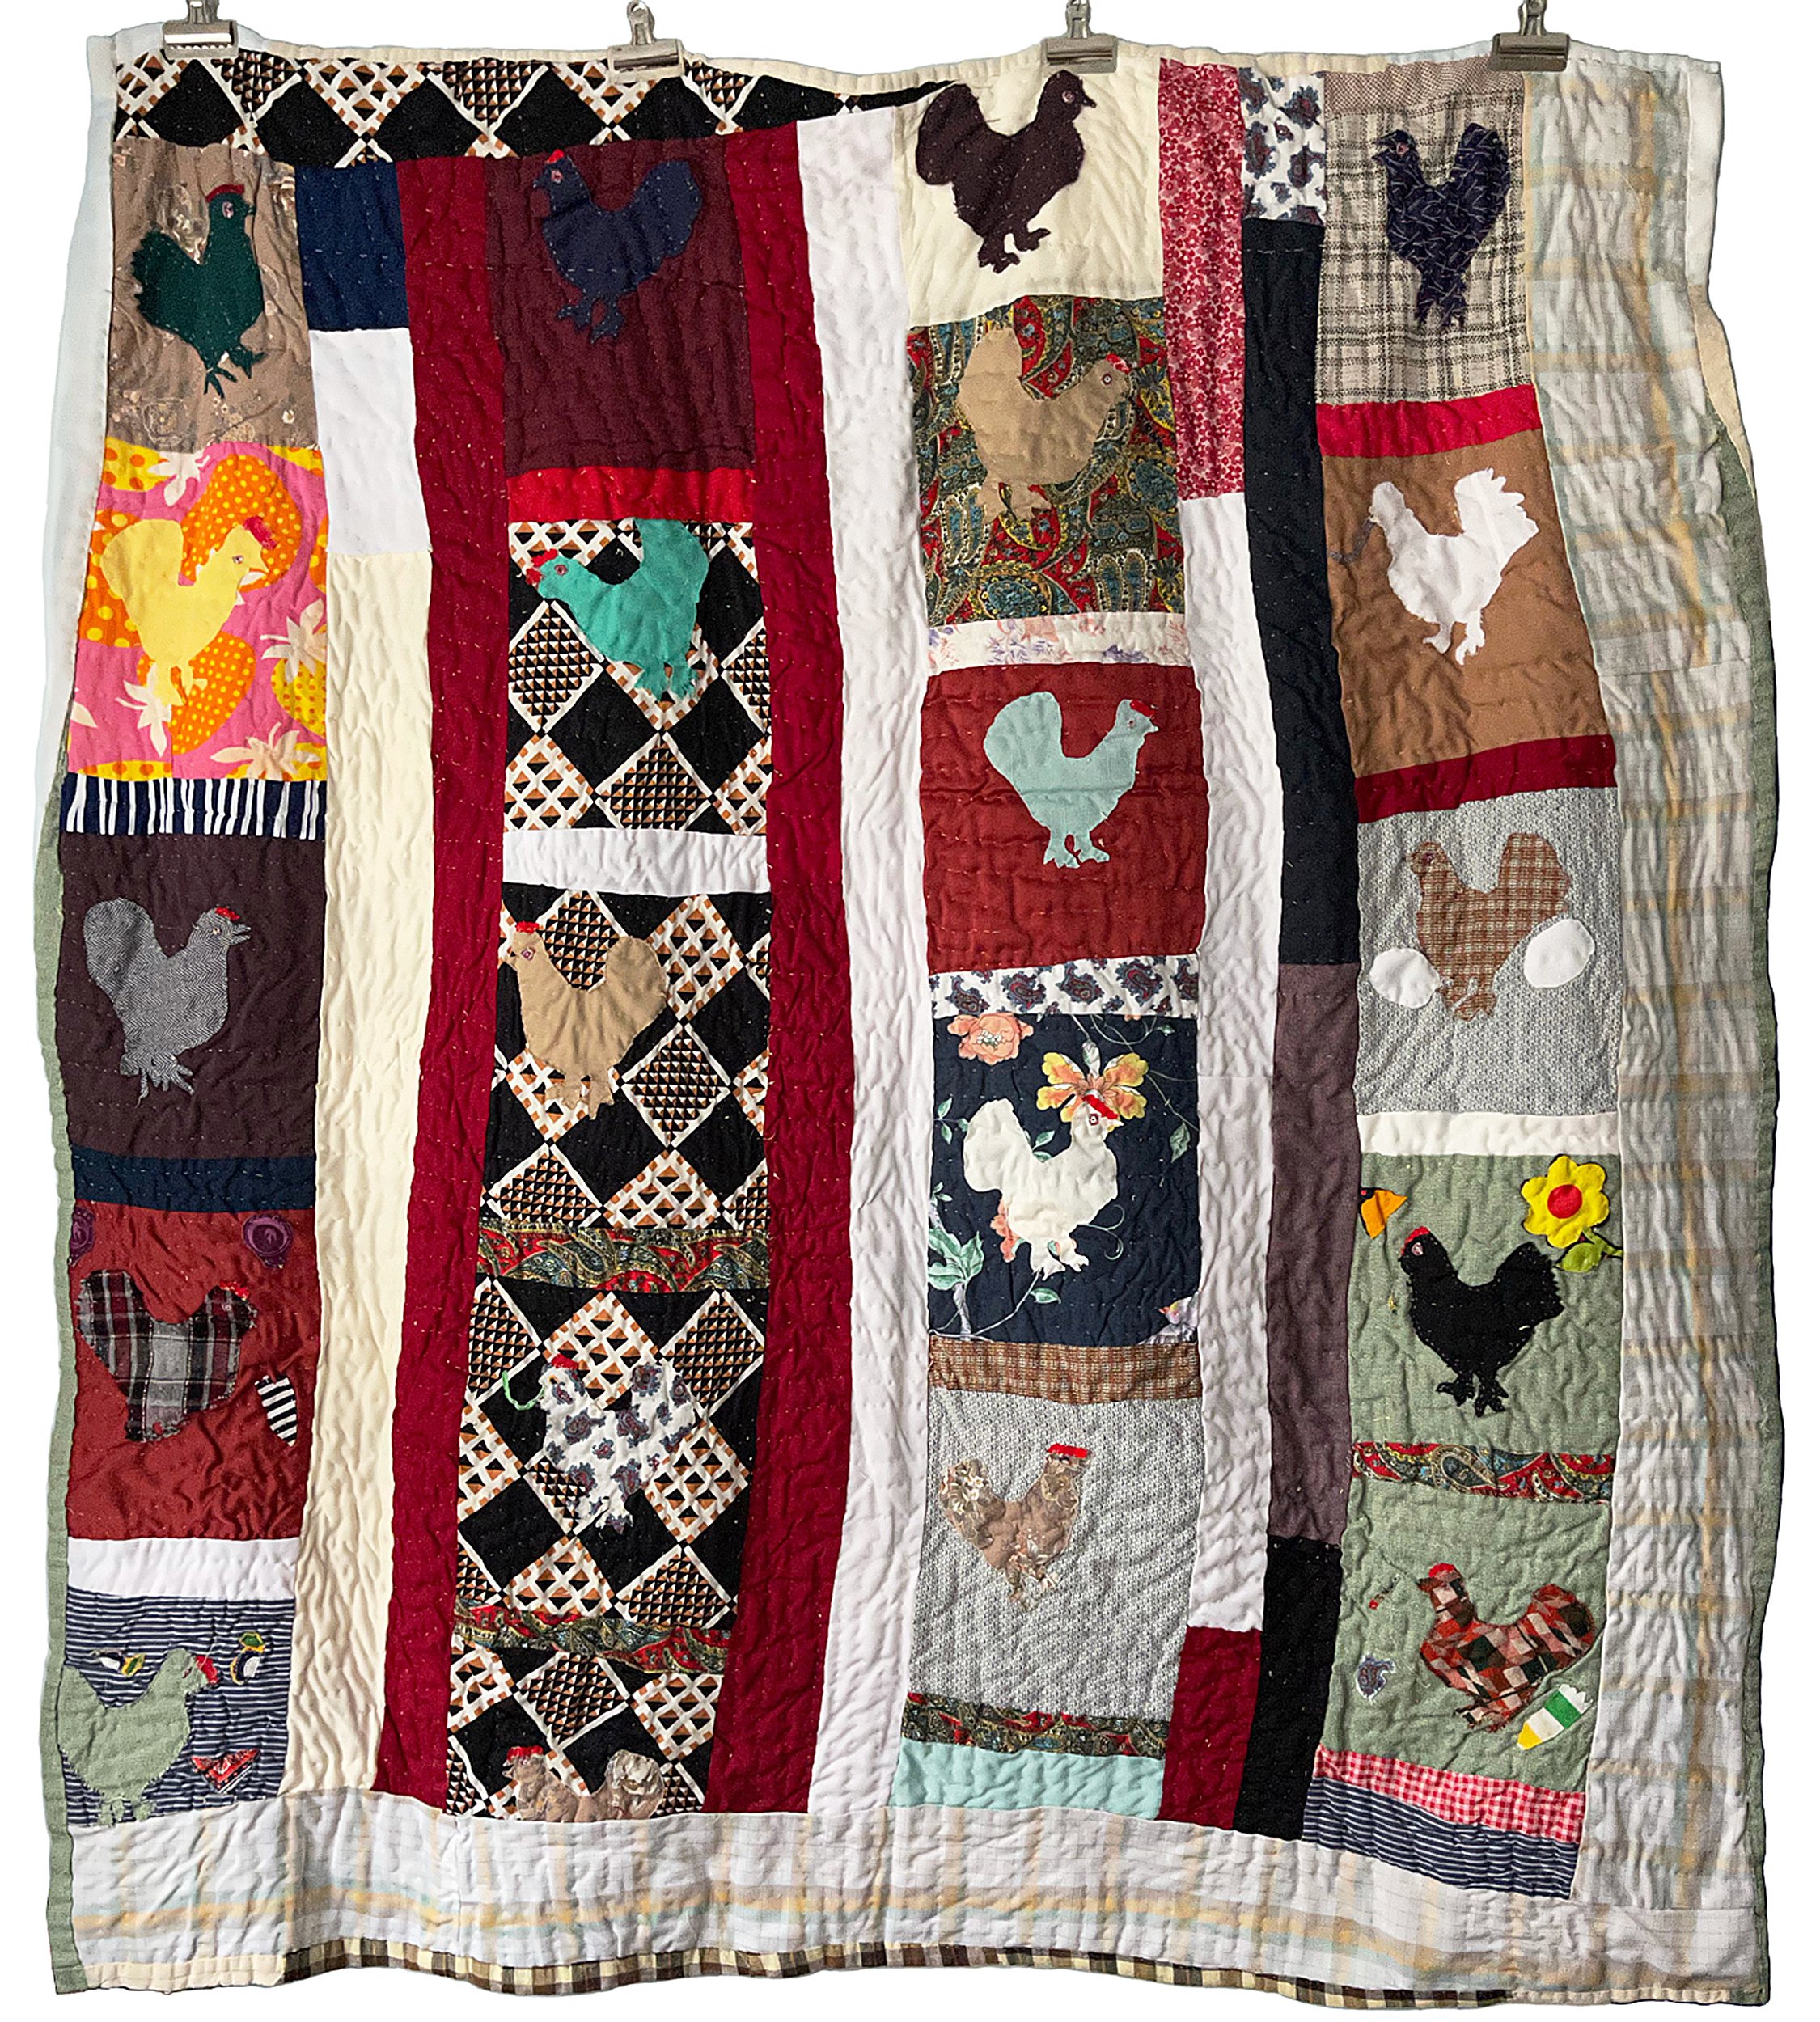   May Liza Jackson    “Chickens” quilt   ca. 1970s  76” x 72”, mixed fabrics  hand-pieced, hand-quilted    ASK ABOUT THIS WORK   